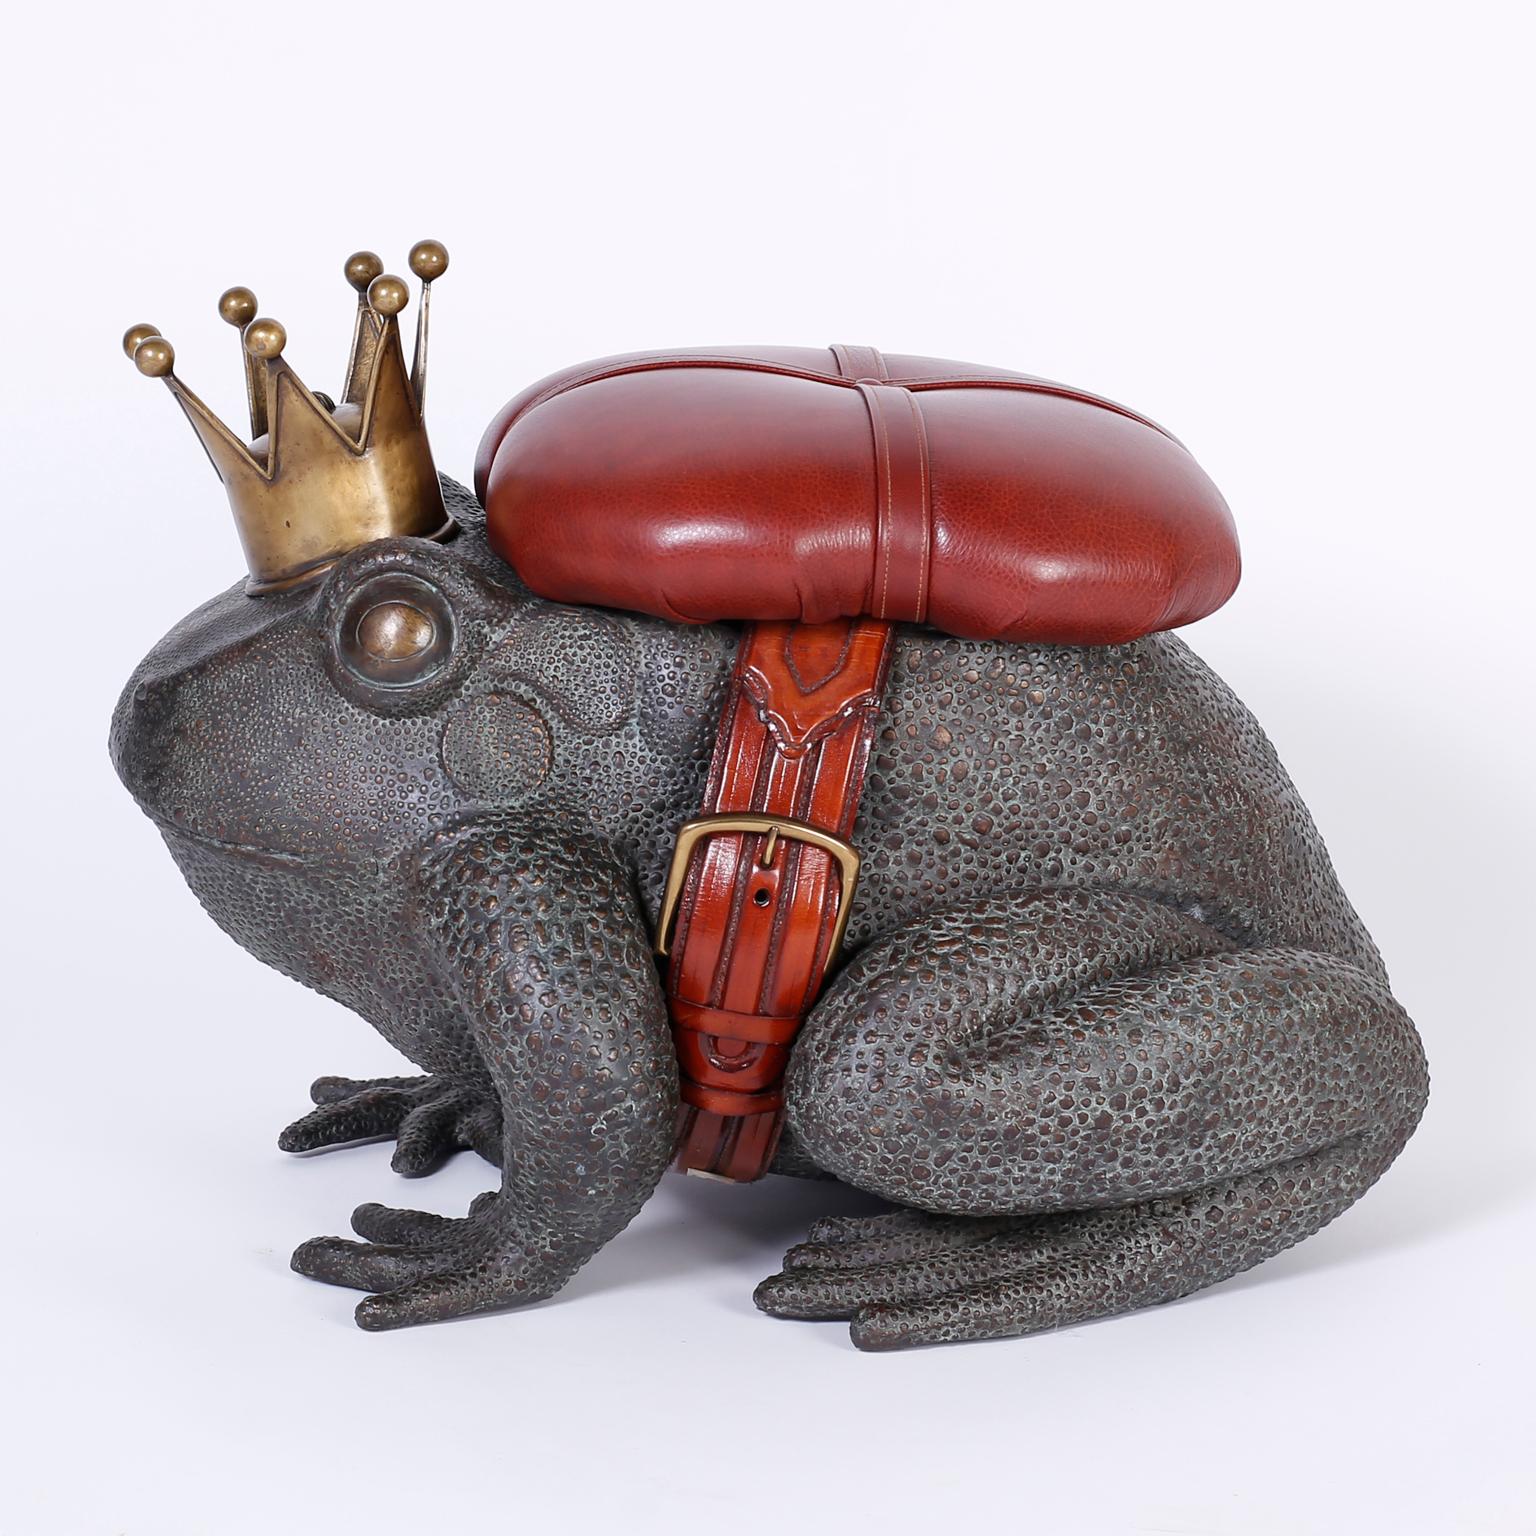 Bronze toad or frog with a classic verdigris patina and featuring a regal crown, oxblood leather button tufted seat and belt, and plenty of decorative appeal. Possibly by Maitland Smith.